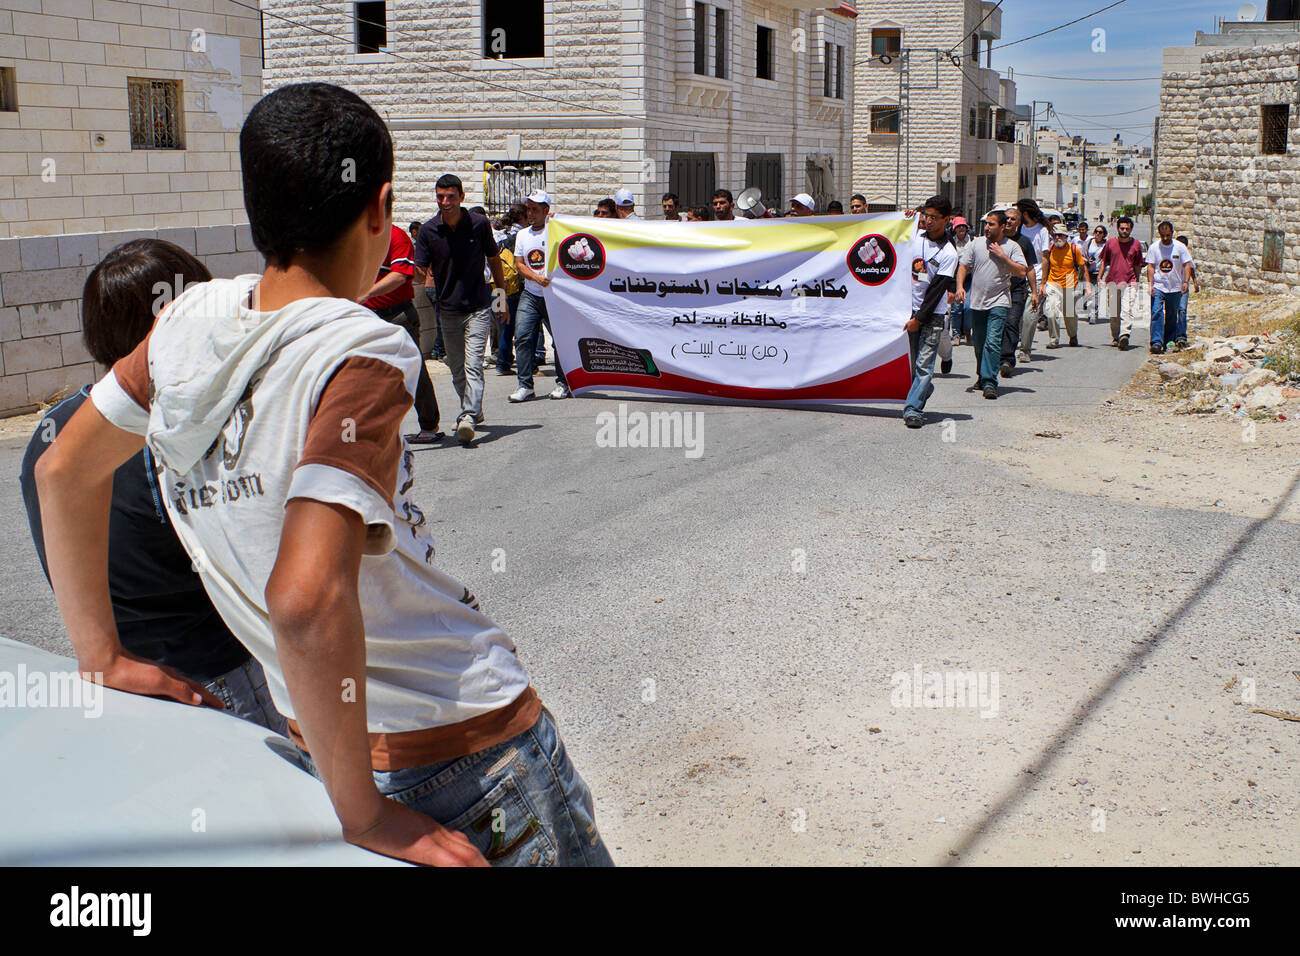 Palestinian people demonstrating against the extension of the apartheid wall near Al Masara, Palestine Stock Photo